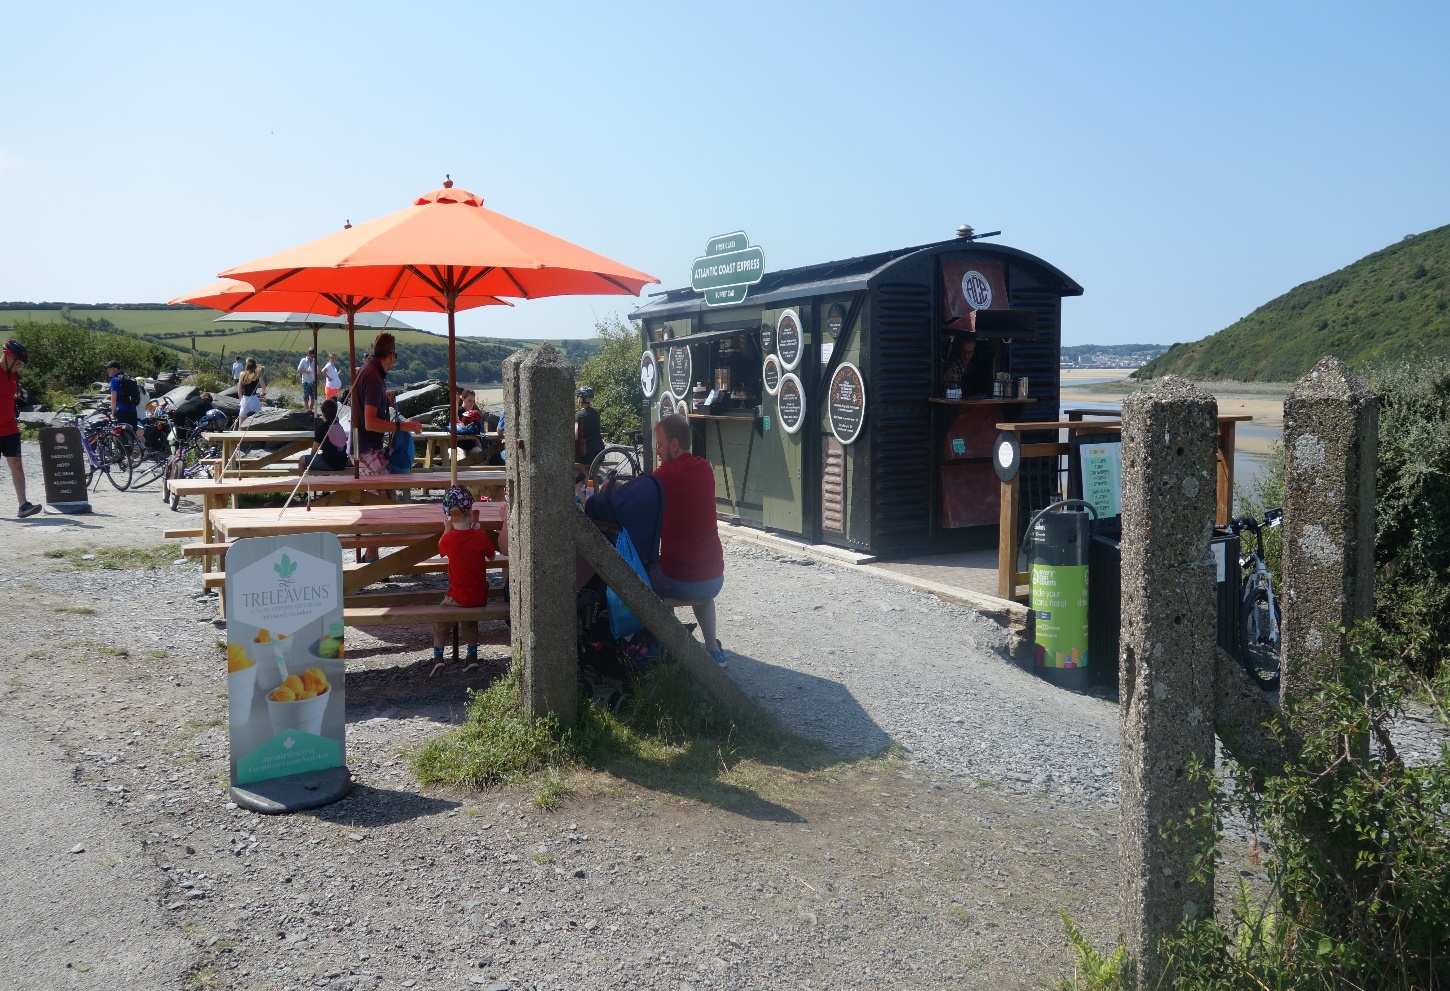 Converted train used as a cafe on the Camel Trail